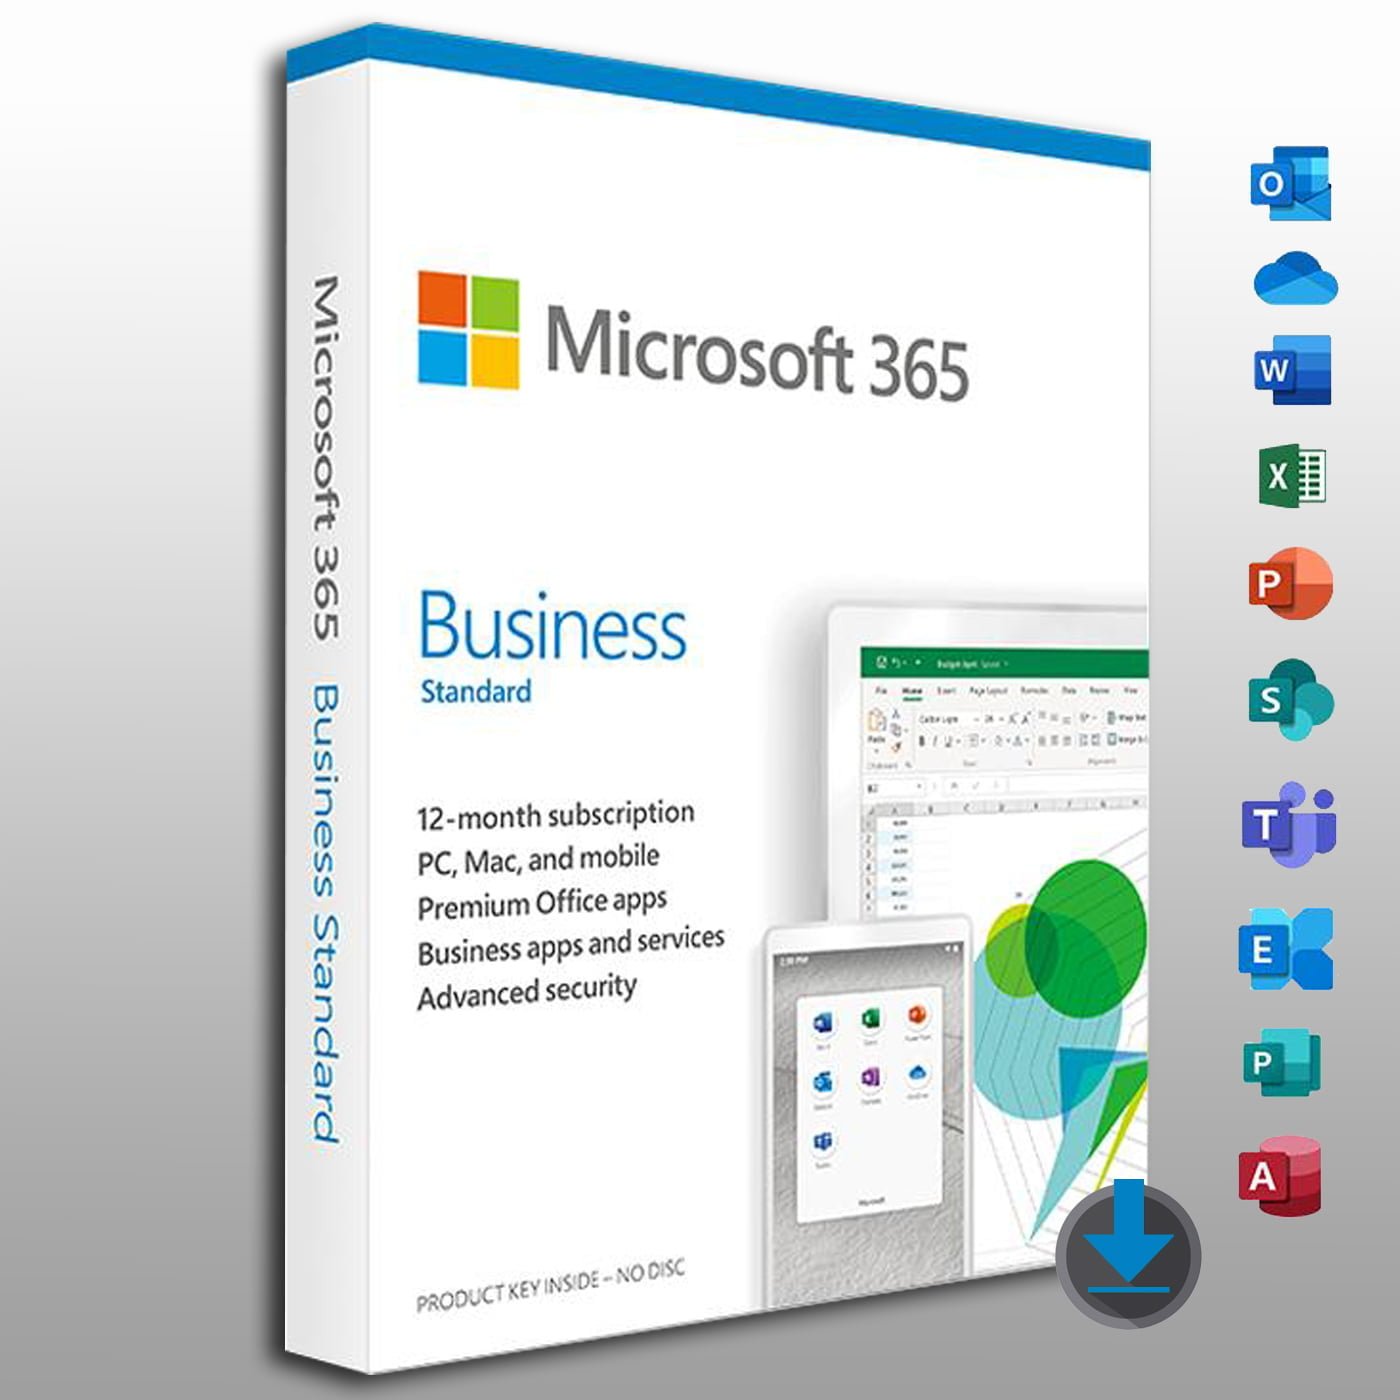 Microsoft Office 365 Business Standard 5-PC/MAC 1 year - Instant ...